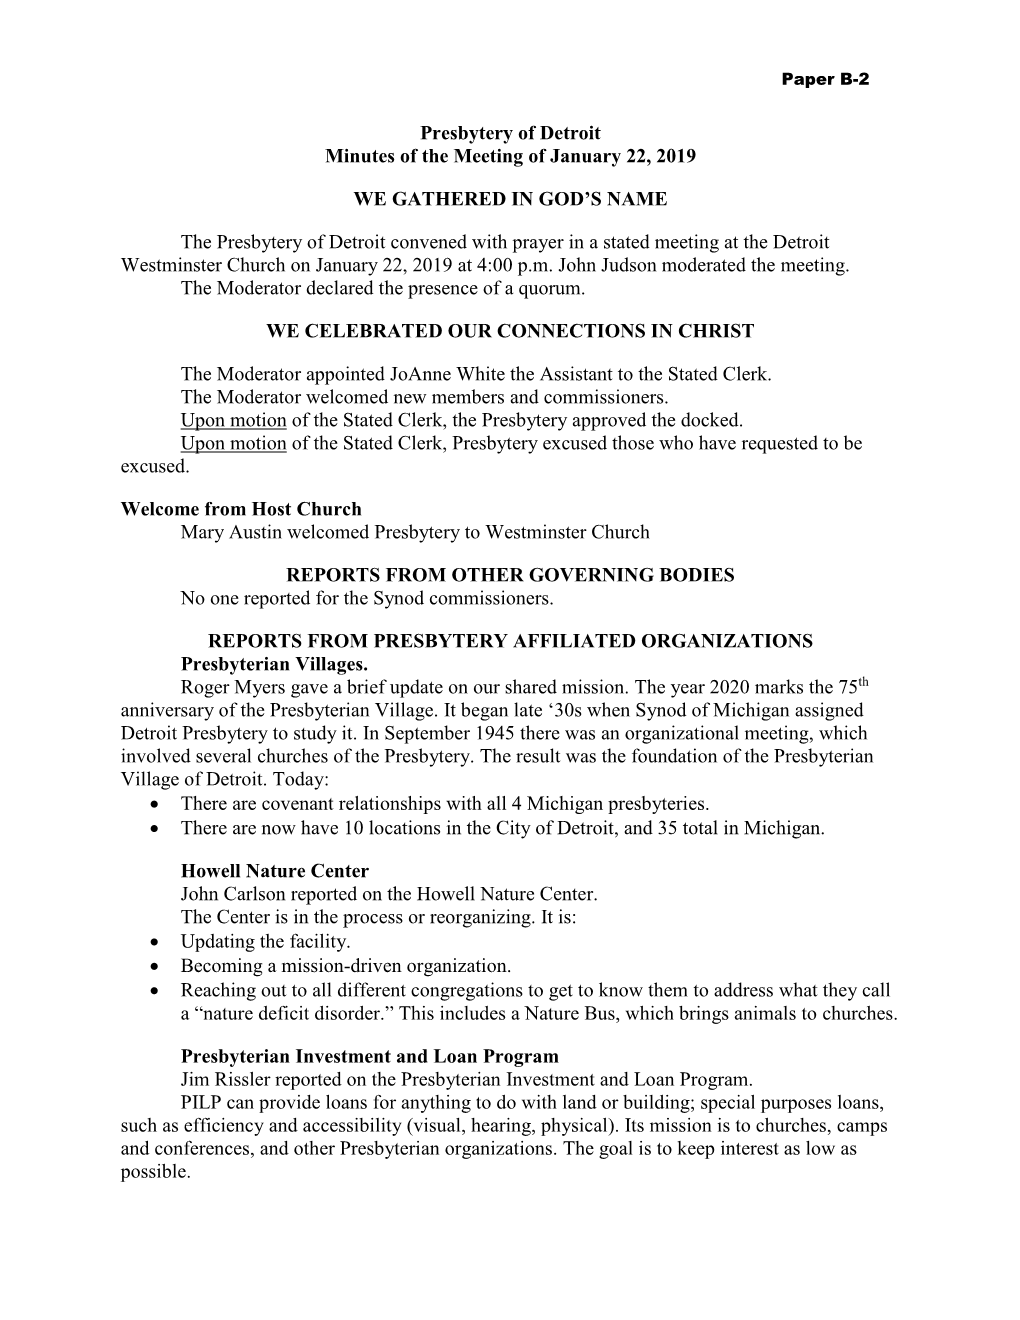 Presbytery of Detroit Minutes of the Meeting of January 22, 2019 WE